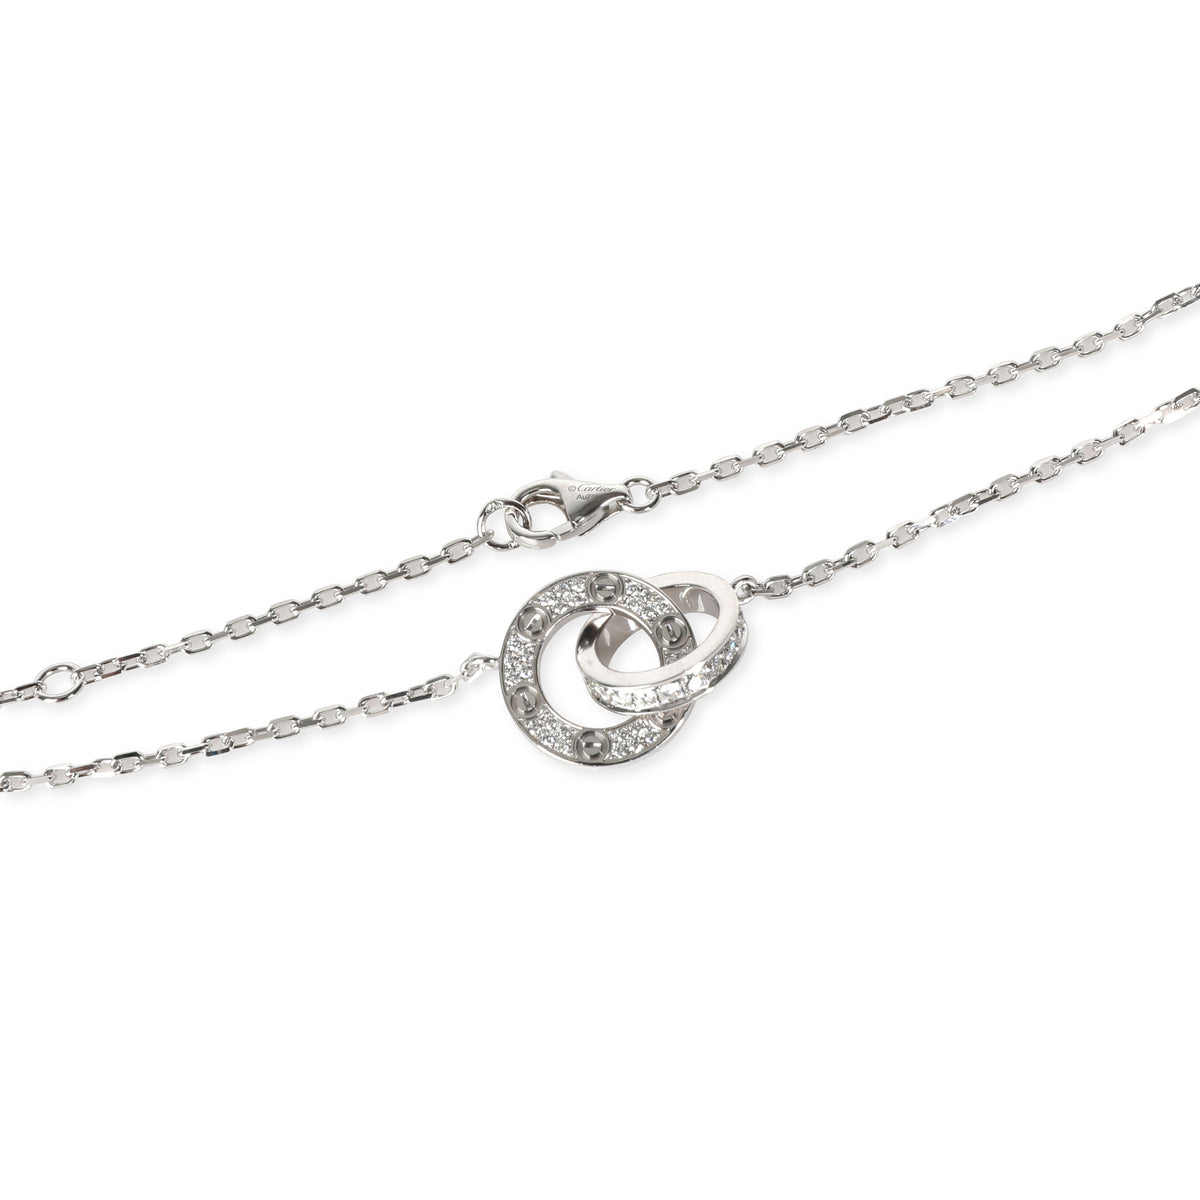 Cartier Love Diamond Necklace in 18K White Gold 0.30 CTW